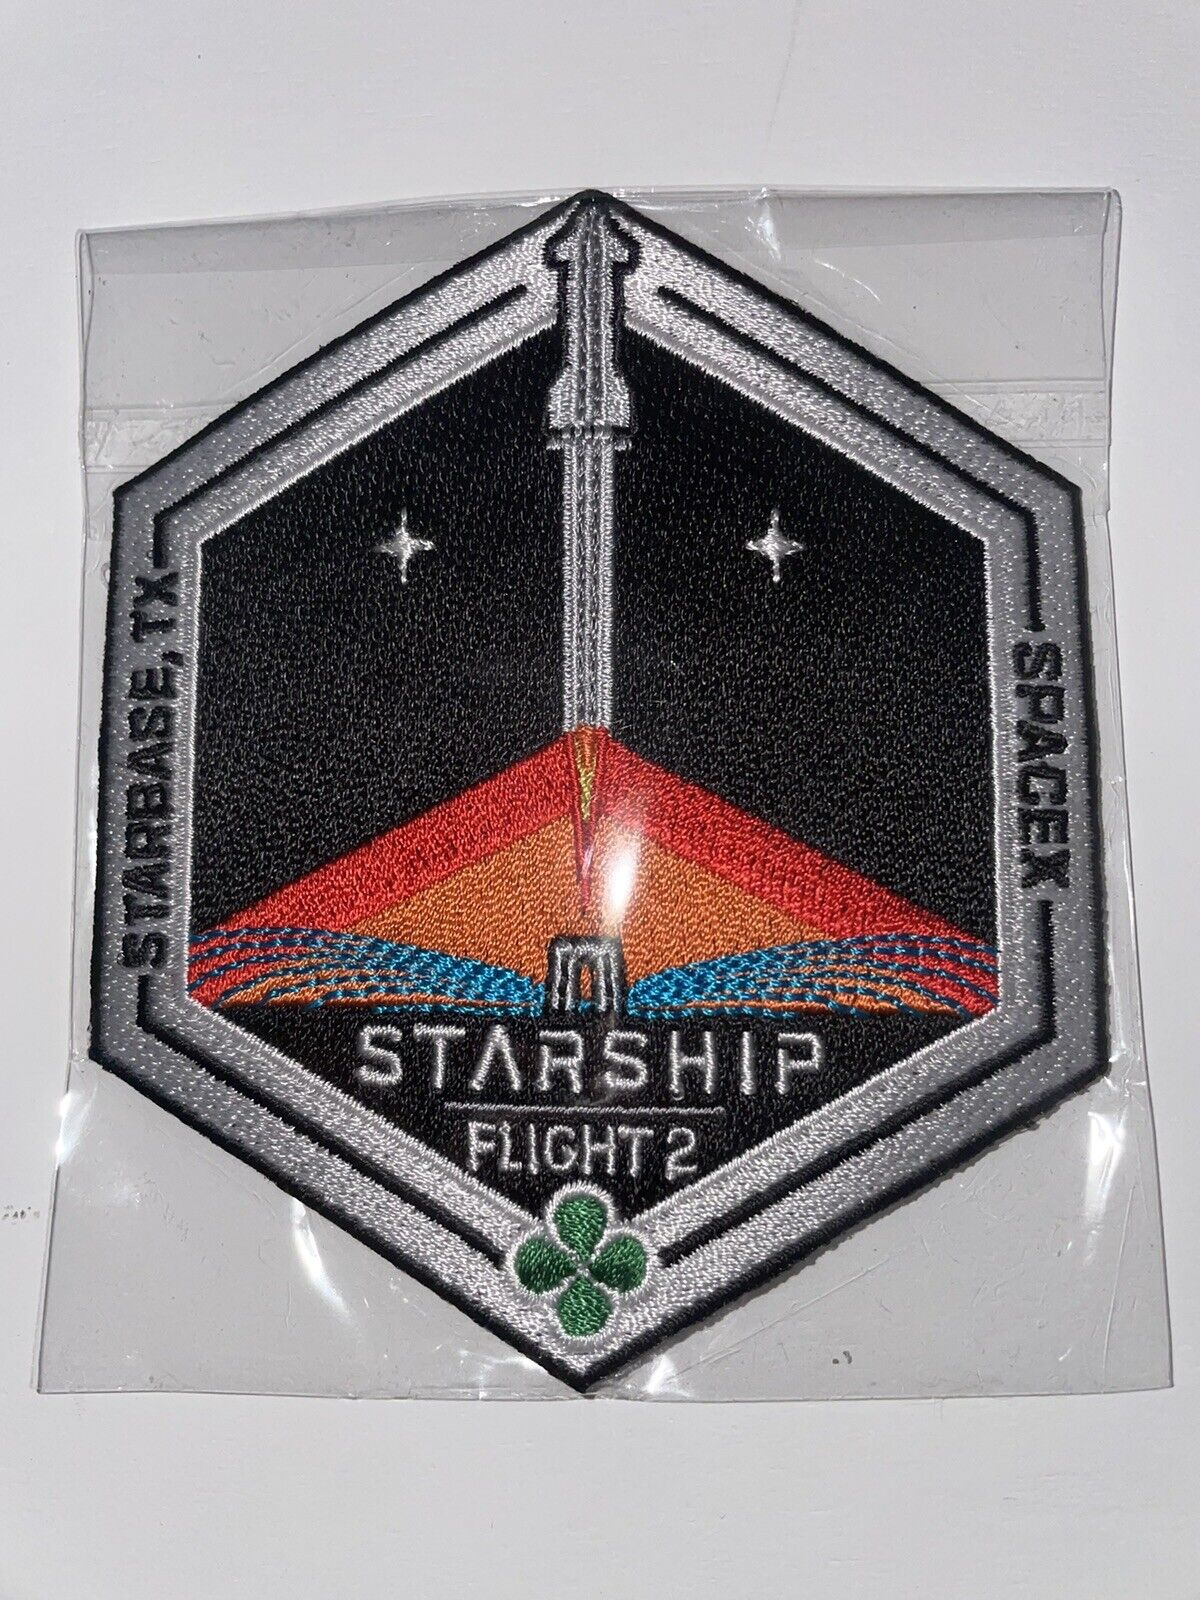 Authentic SpaceX Starship Test Flight 2 Mission Patch